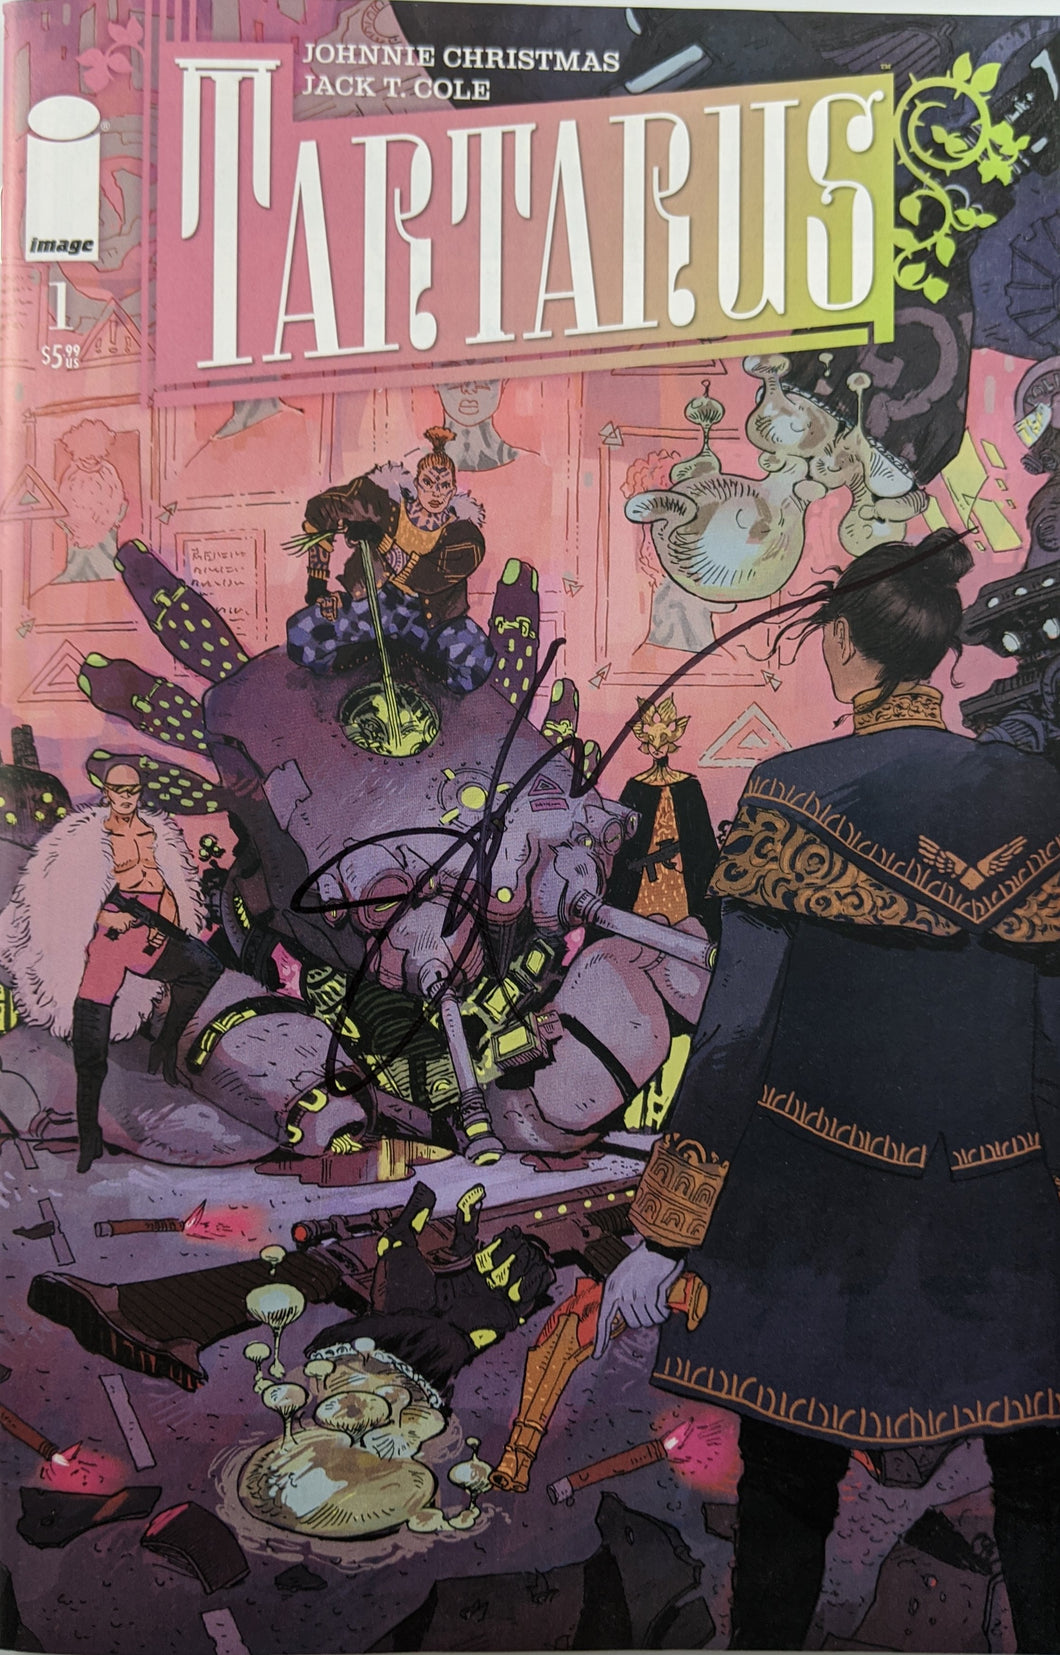 Tartarus (2020) #1 Cover A SIGNED